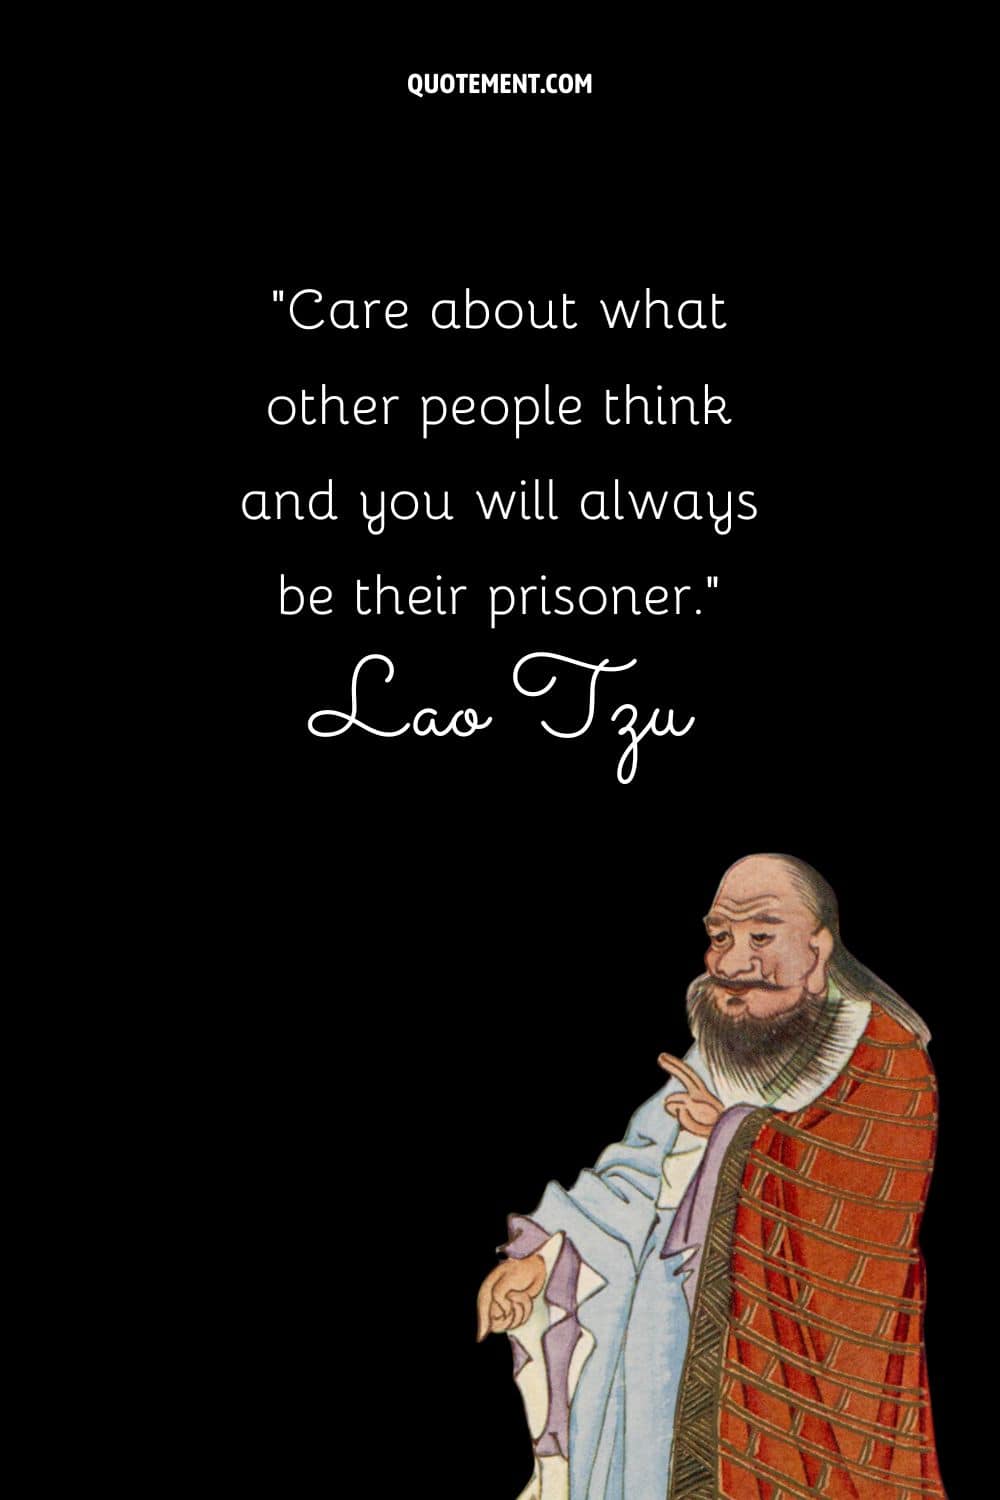 Care about what other people think and you will always be their prisoner